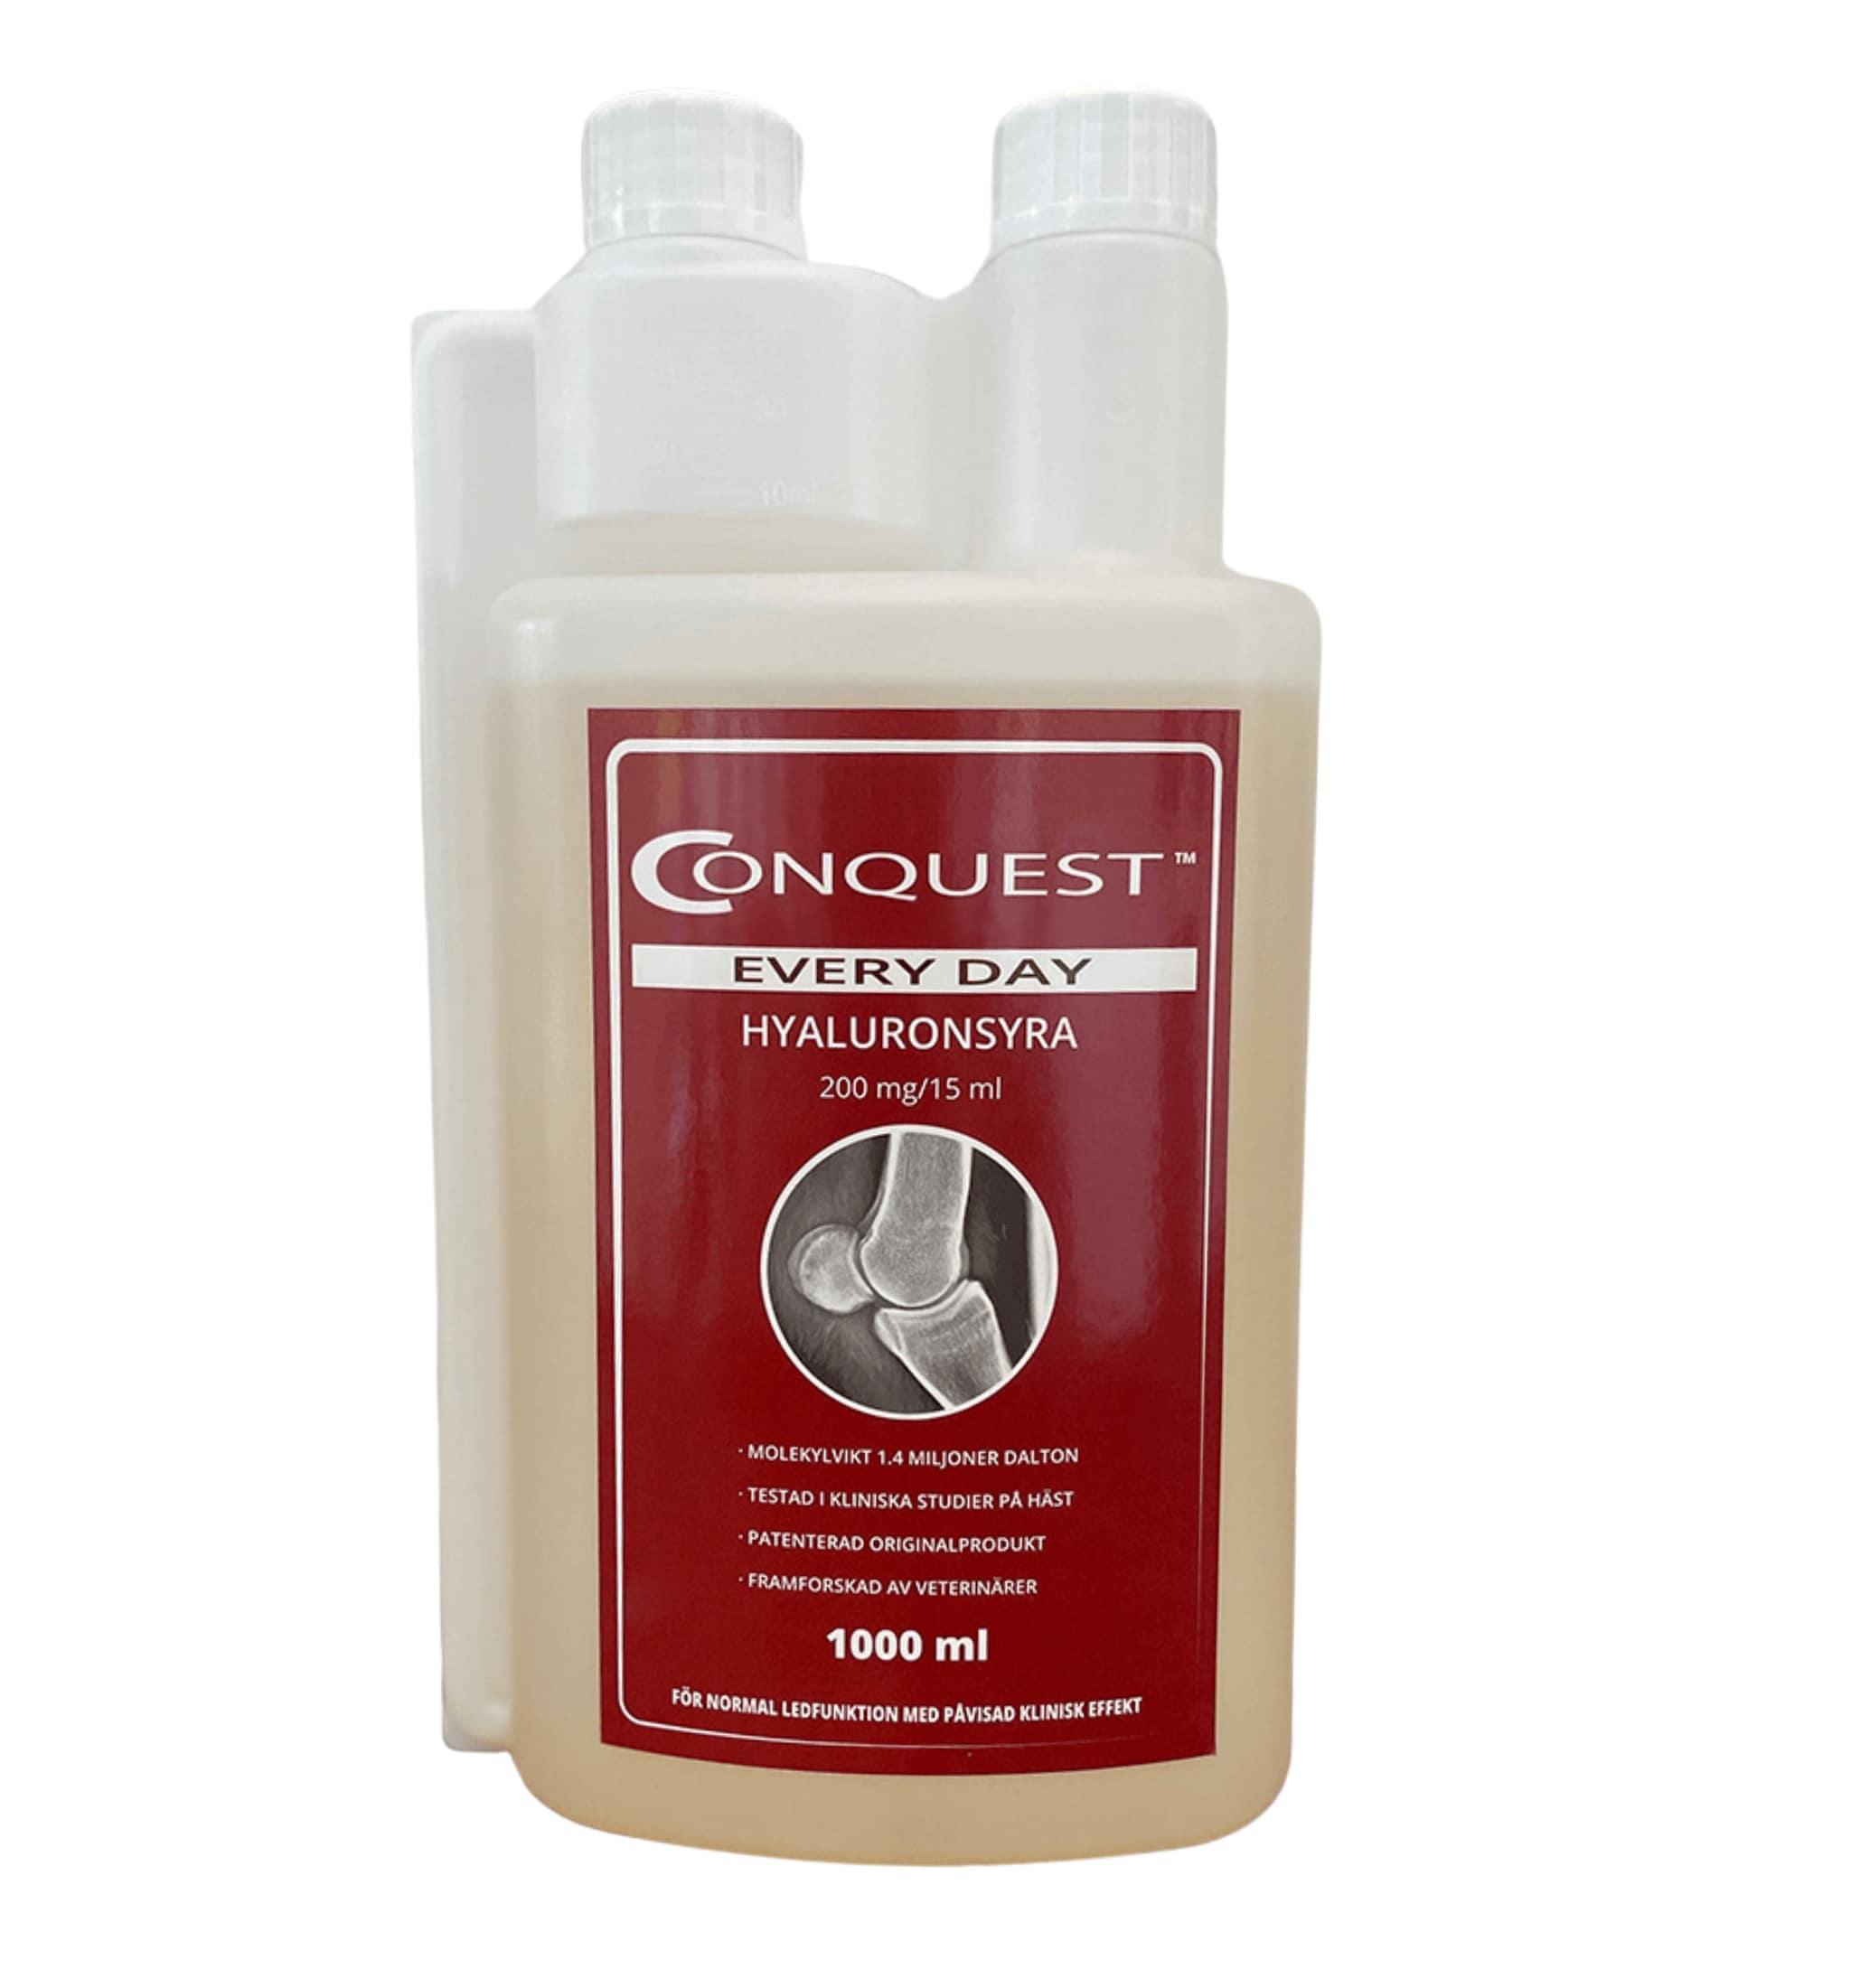 Conquest™ Every Day Hyaluronic Acid - 1000 ml